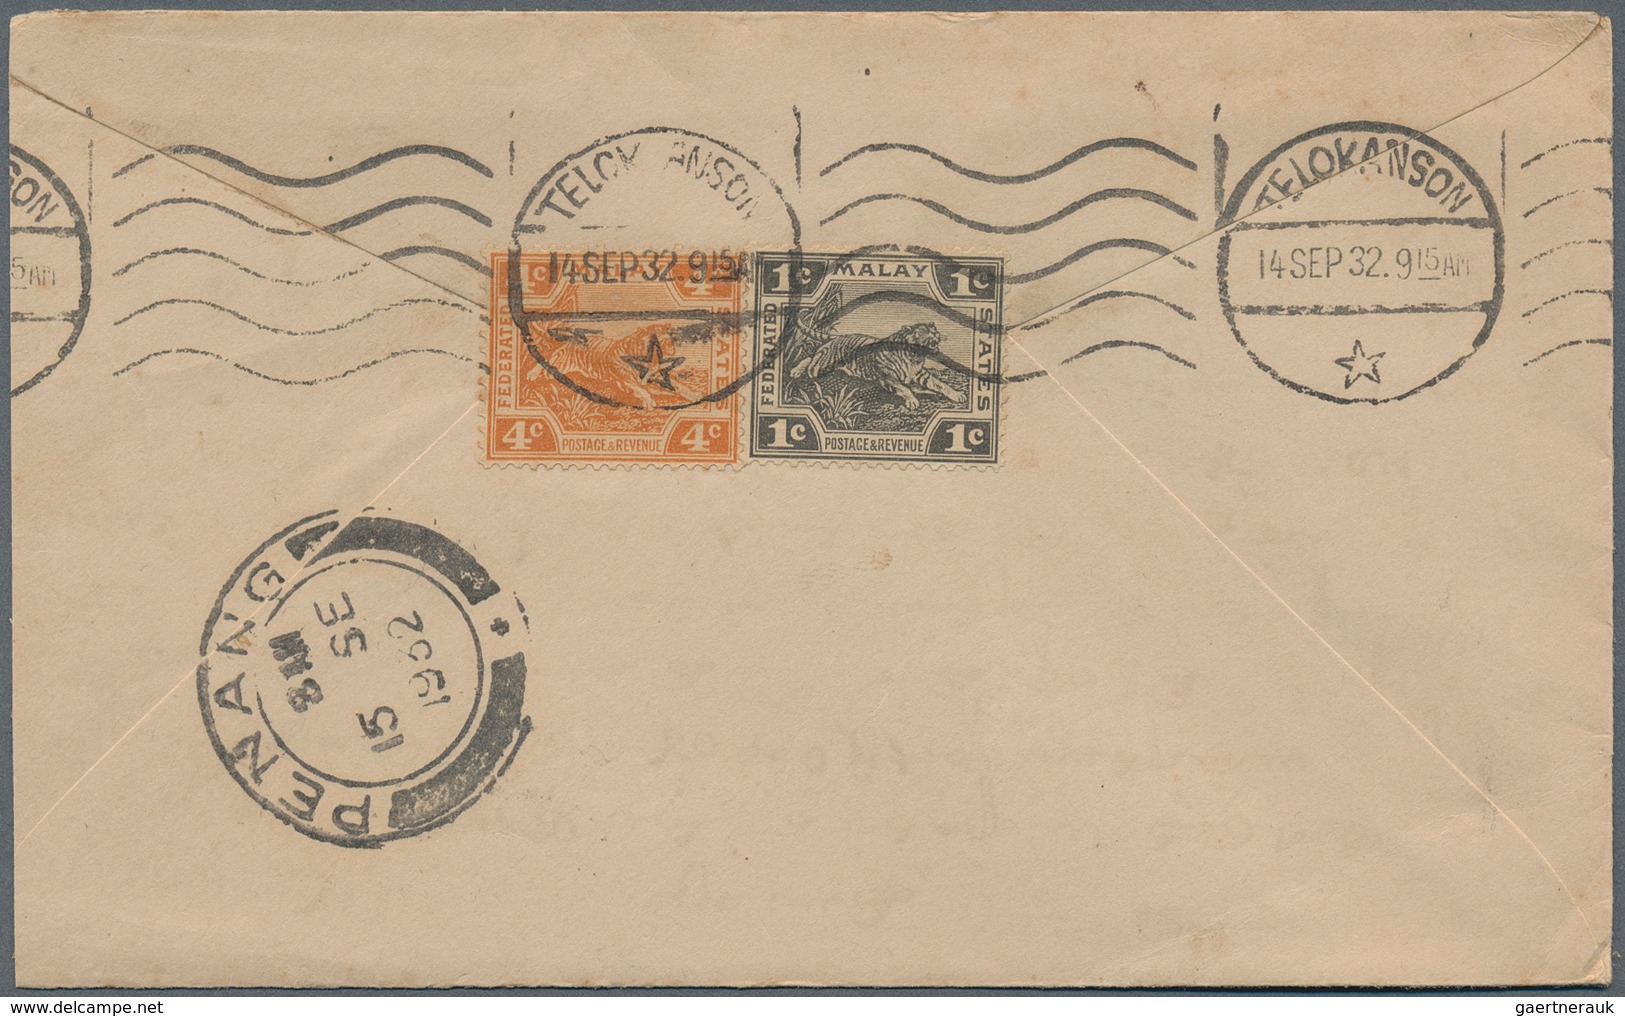 06598 Malaiische Staaten - Perak: 1915/1941, TELOK ANSON: small group with 12 covers bearing different sta